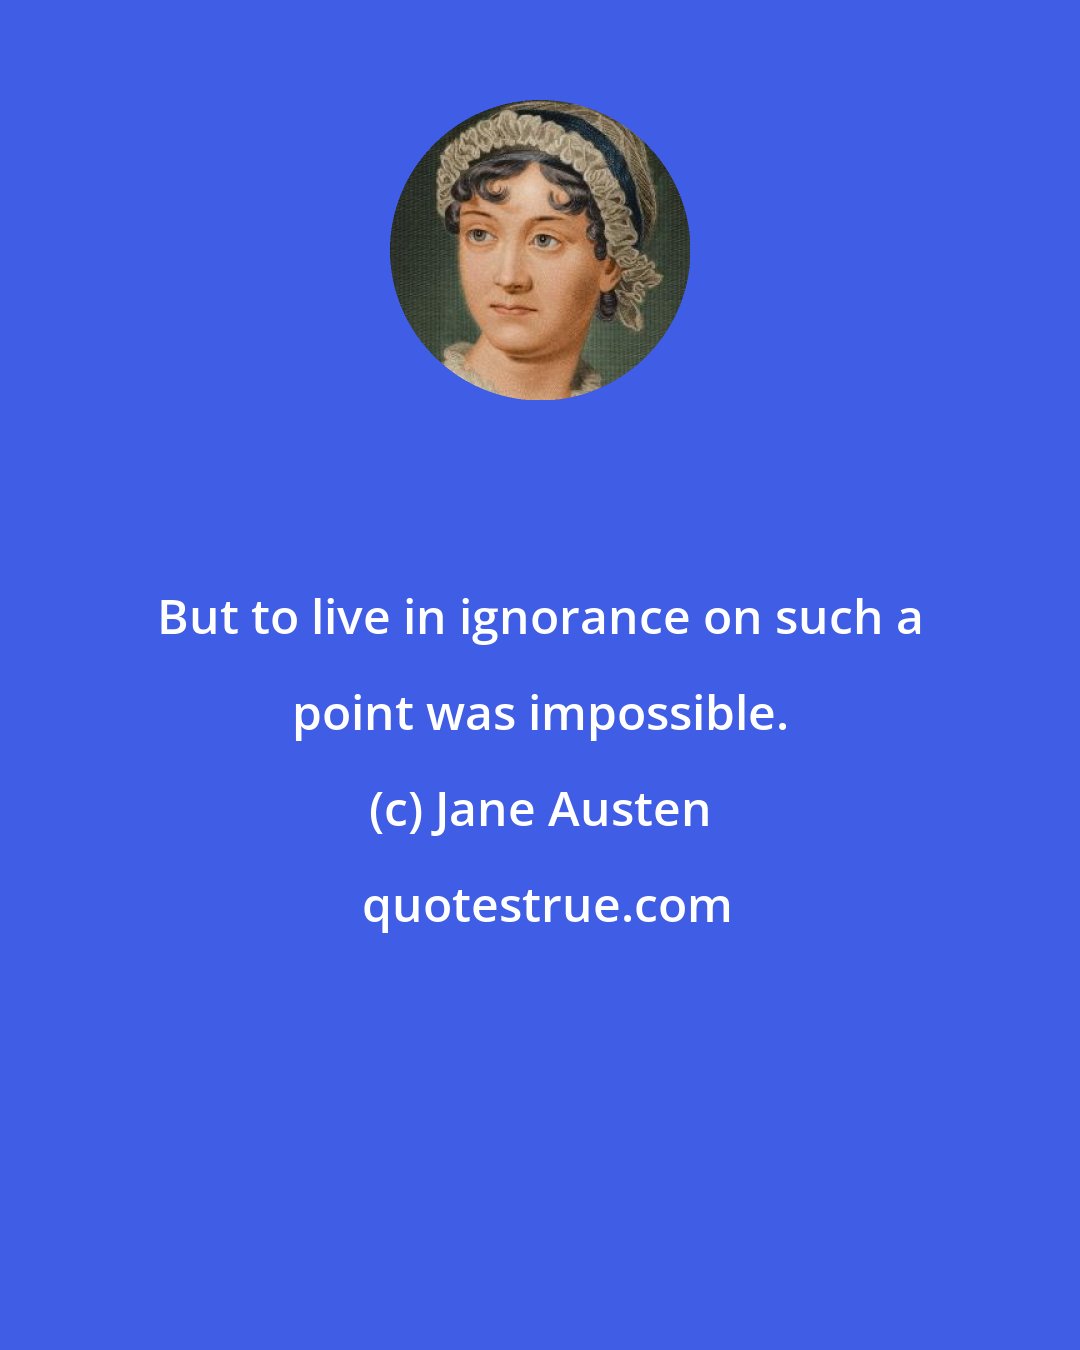 Jane Austen: But to live in ignorance on such a point was impossible.